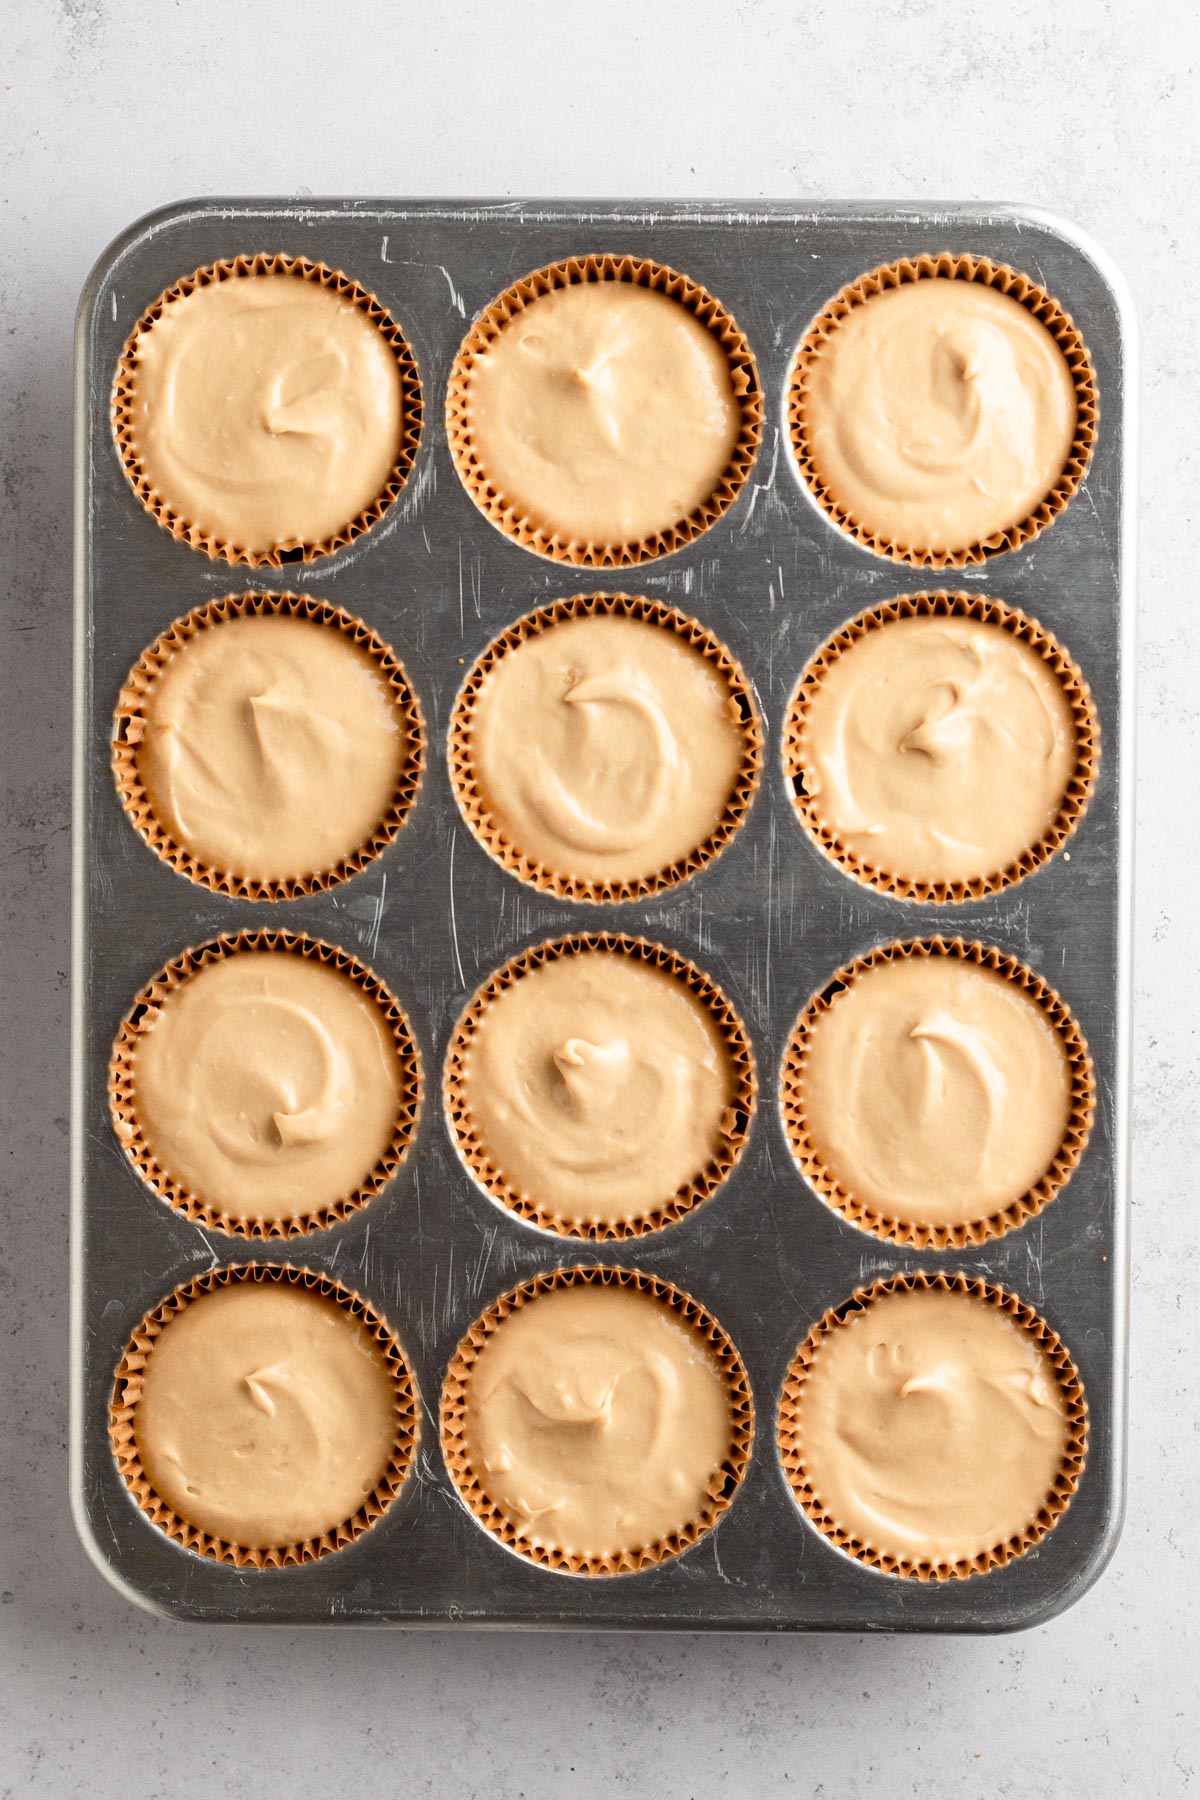 Cheesecake batter in muffin liners.